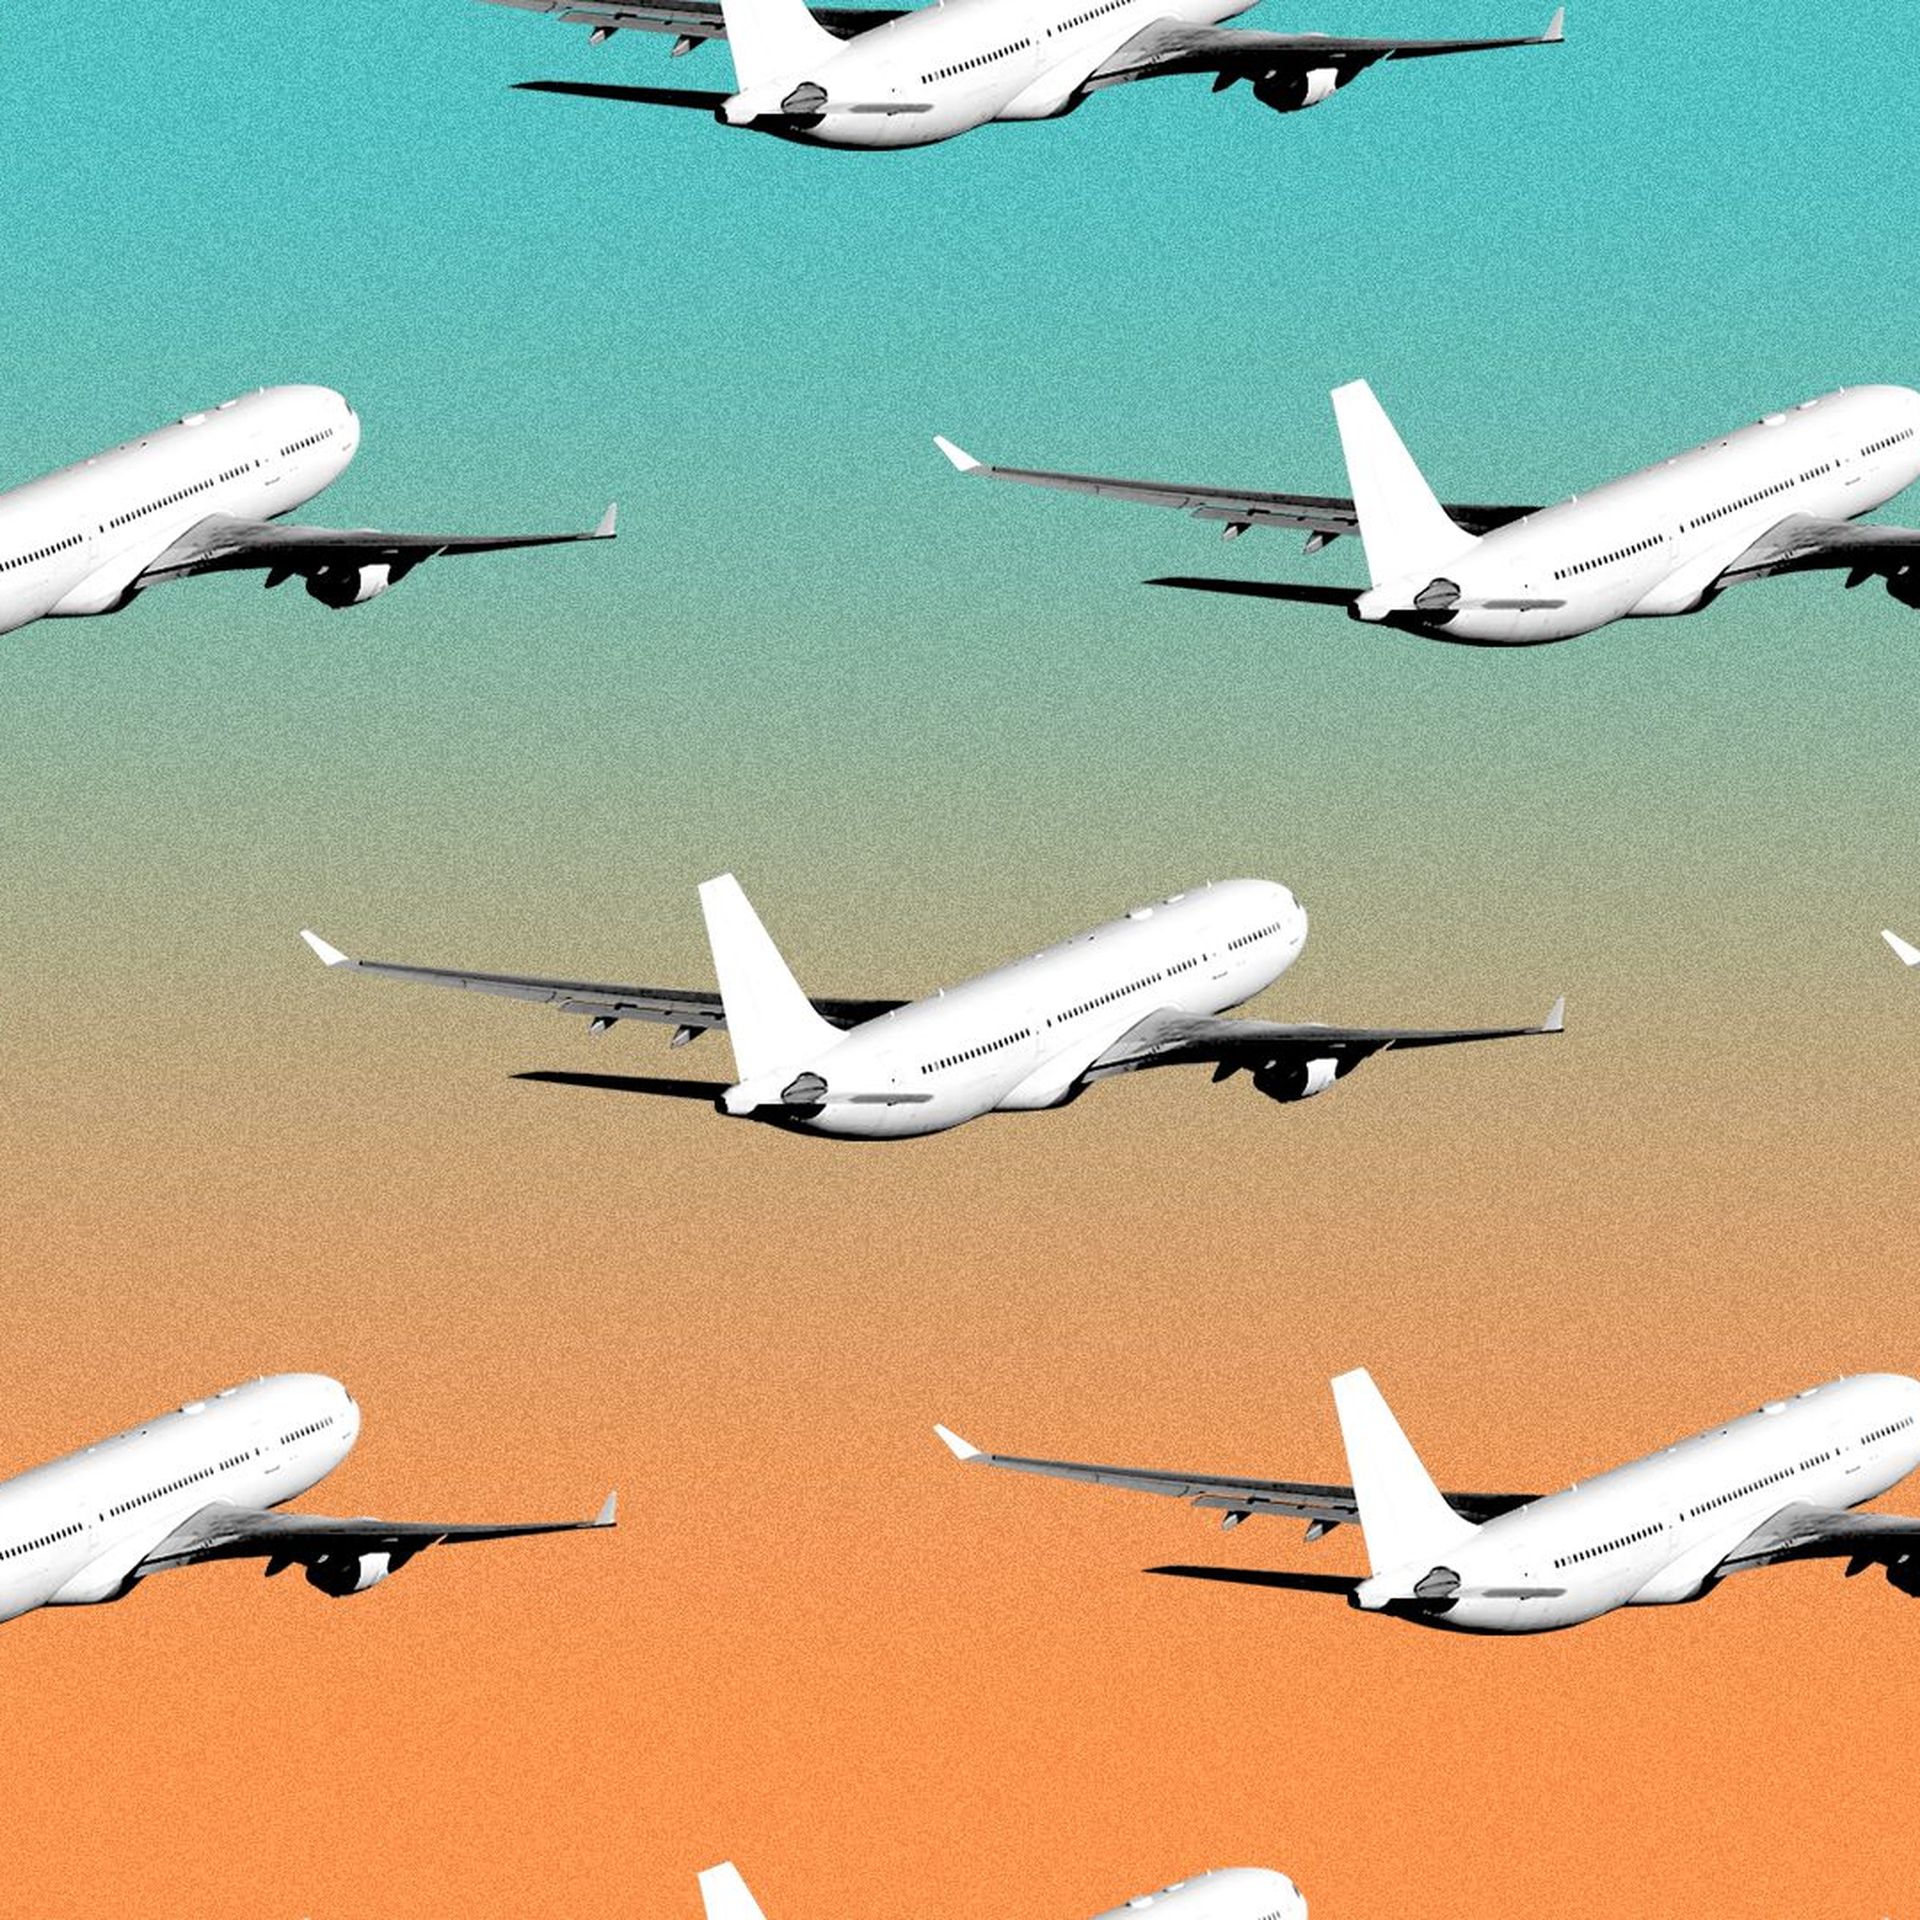 Illustration of a pattern of airplanes.